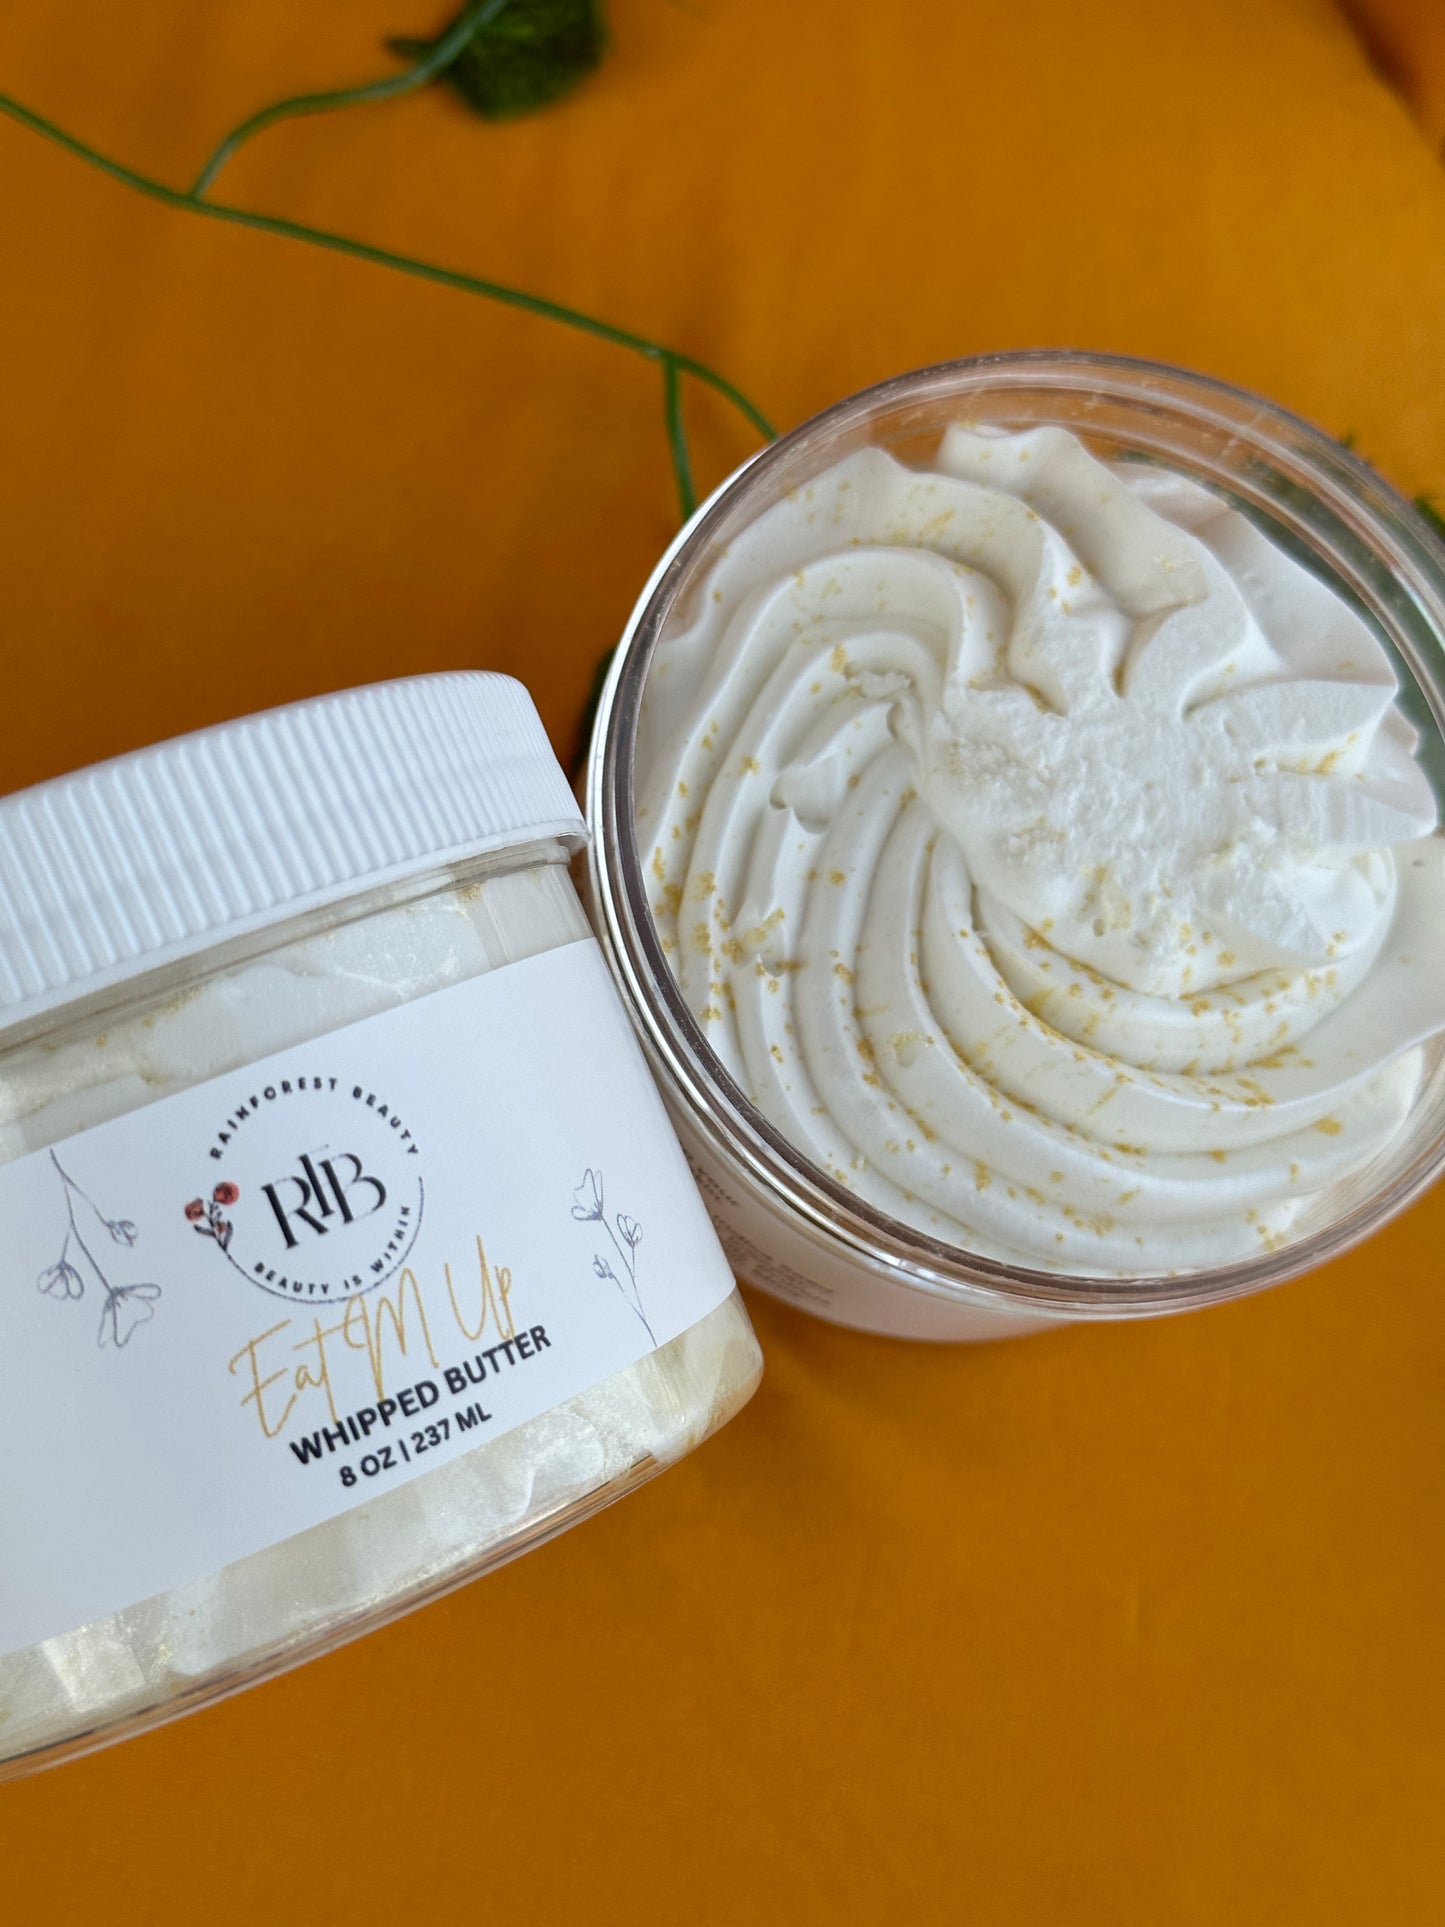 Eat Me Up Body Butter